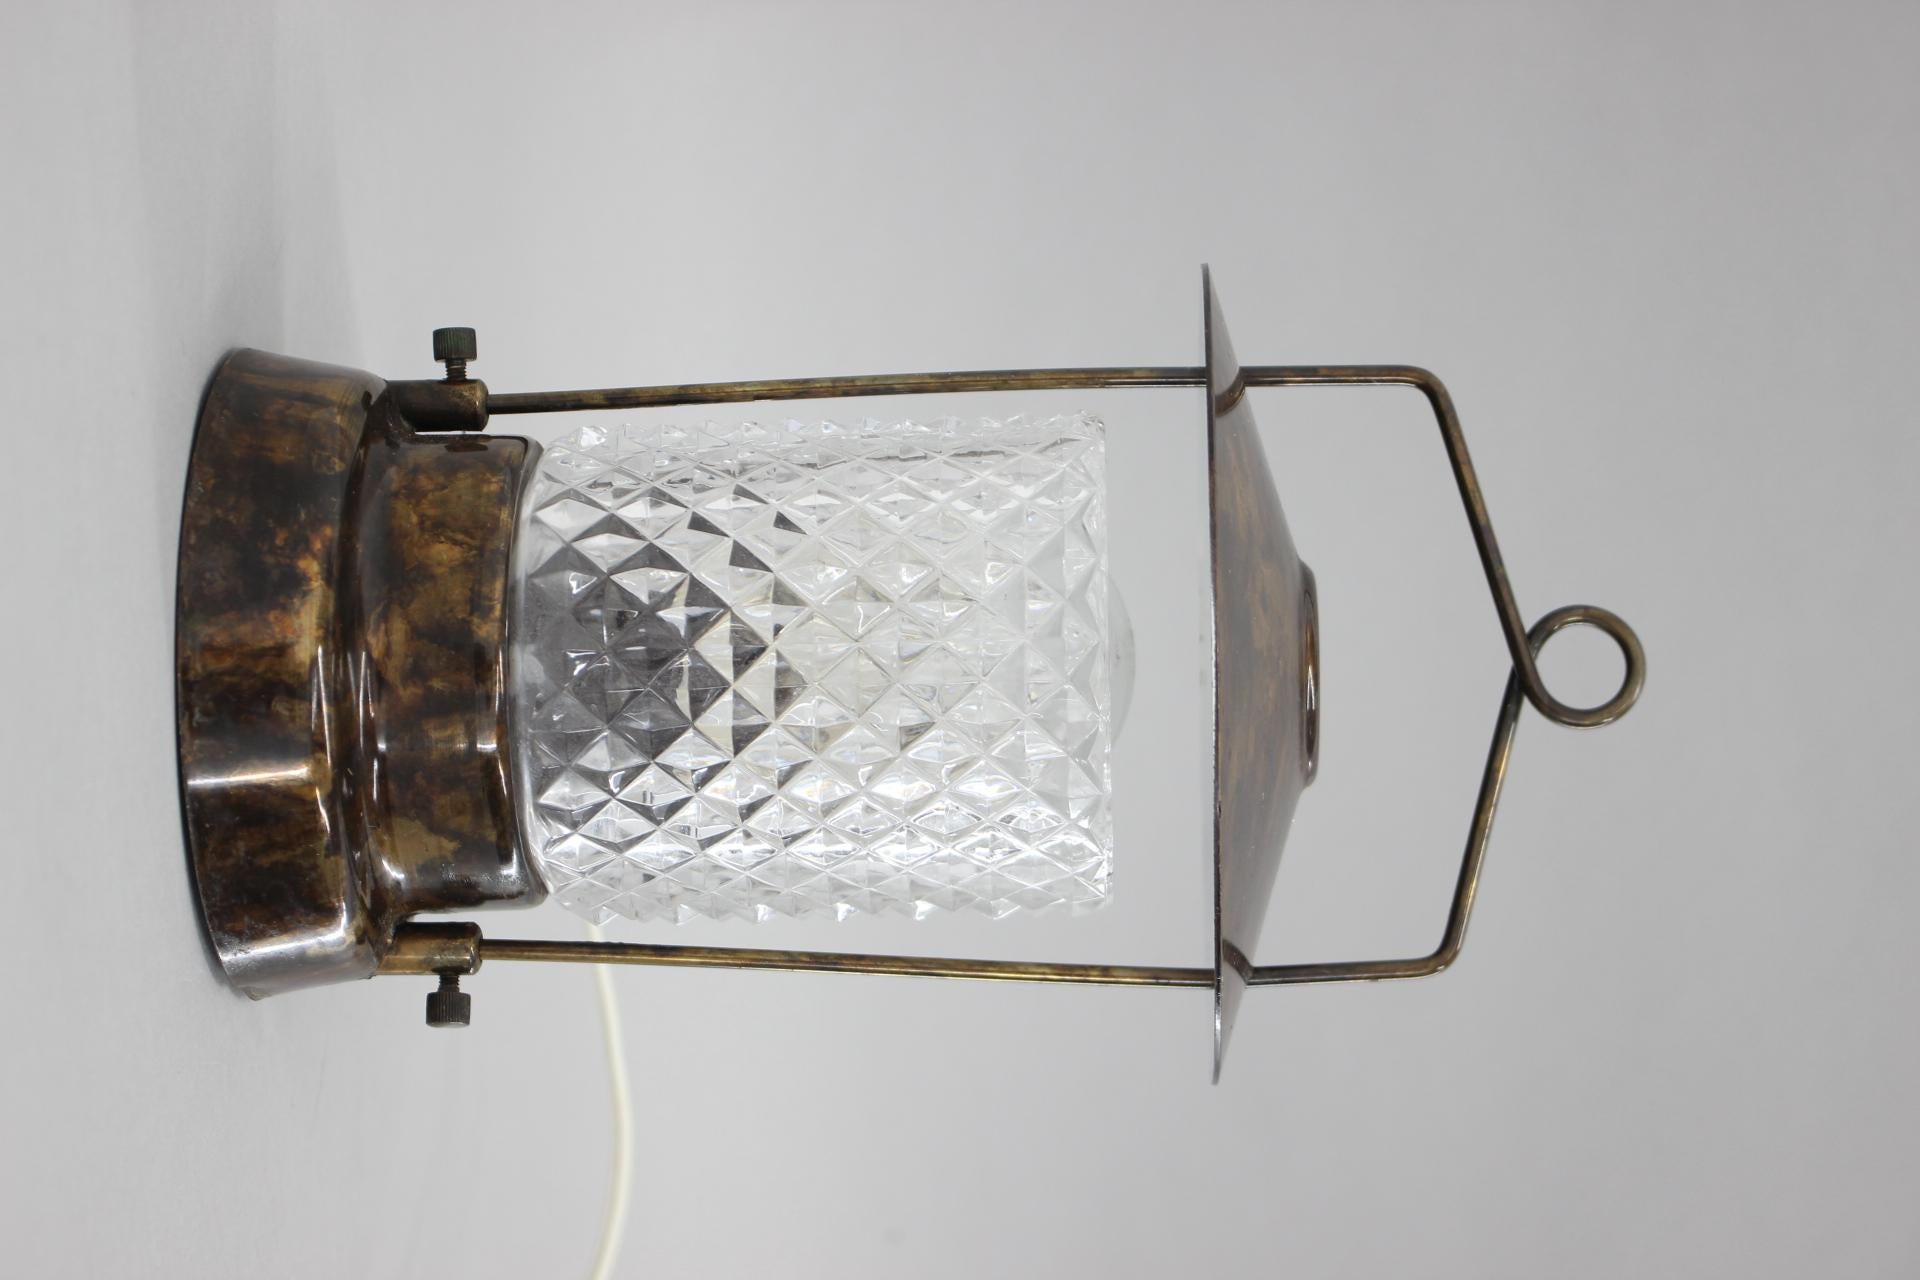 - Vintage table lamp made of glass and metal
- produced by Lidokov in the former Czechoslovakia in the 1970's
- it can also be hung
- Good vintage condition.